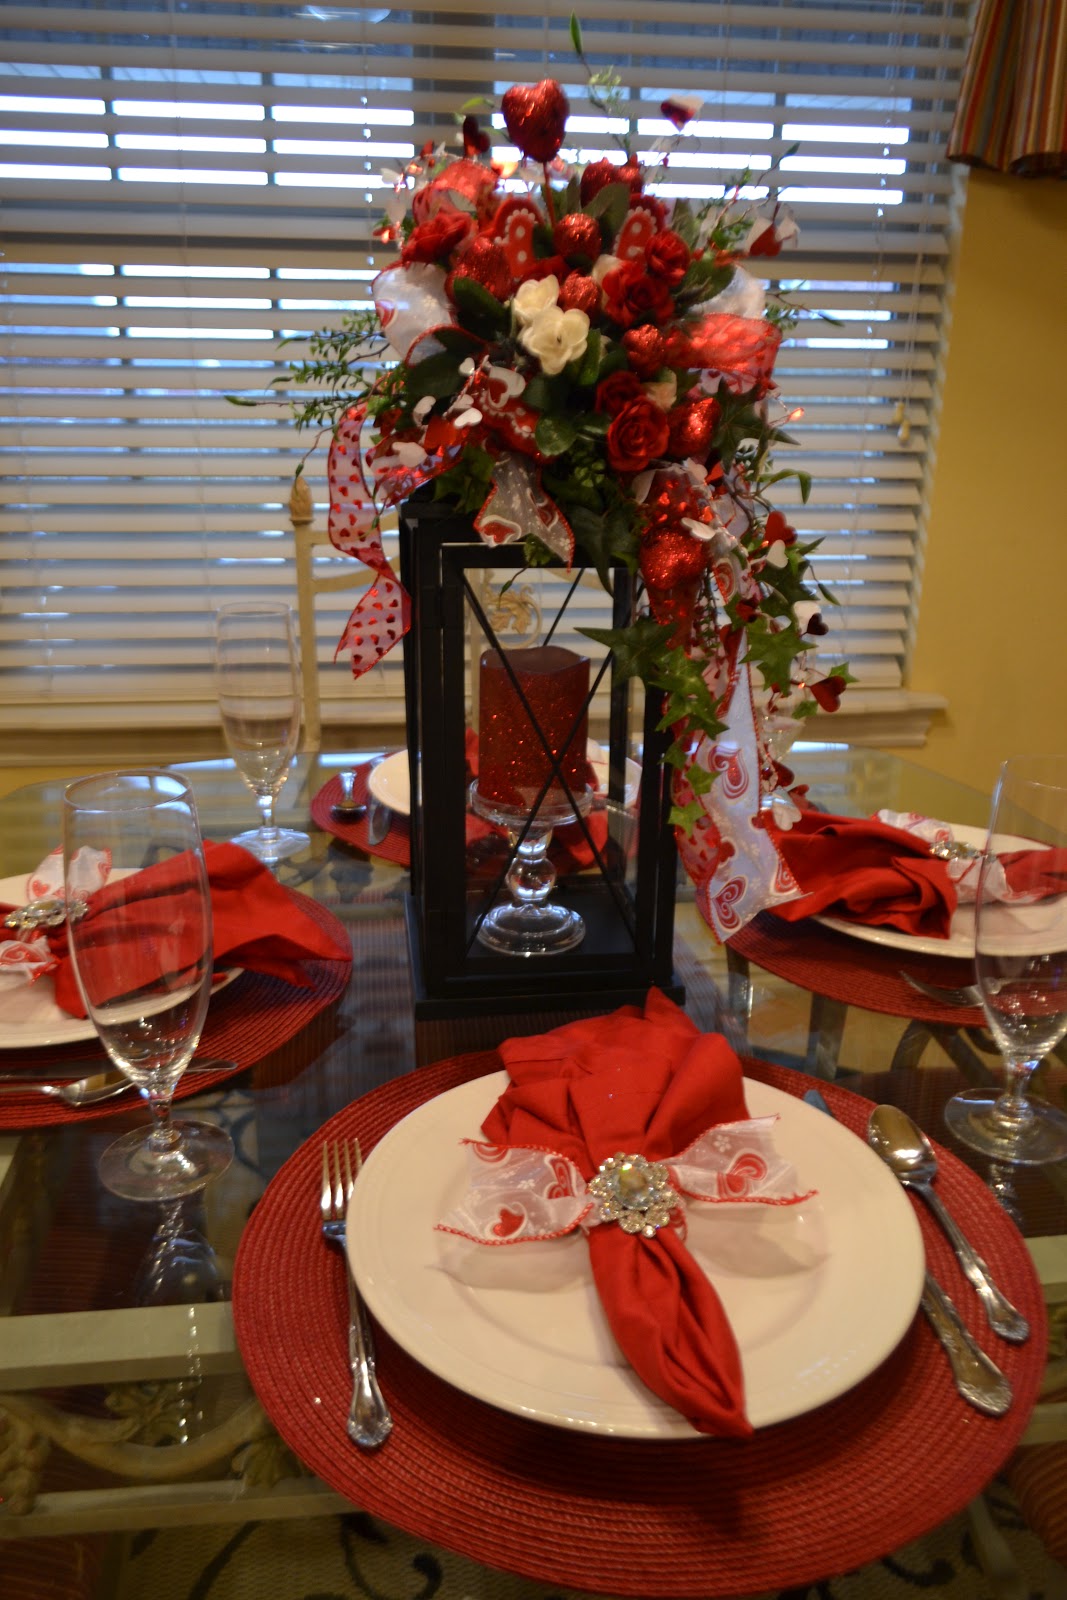 Hi Everyone! I thought I would share a little Valentine decor with you